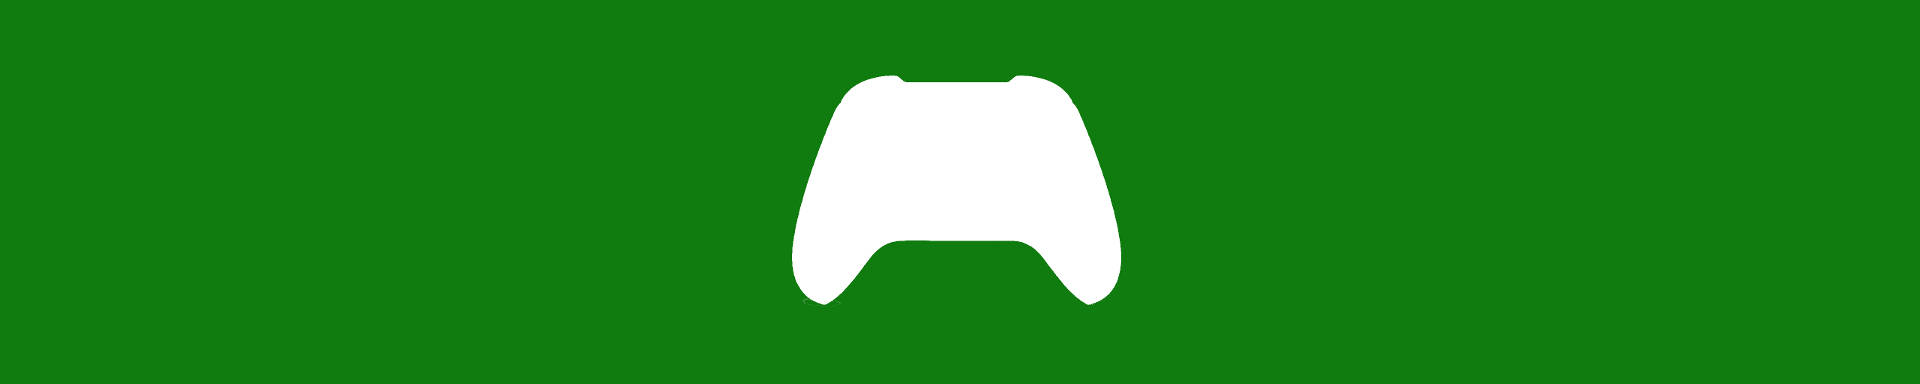 Xbox Free-To-Play Multiplayer slice